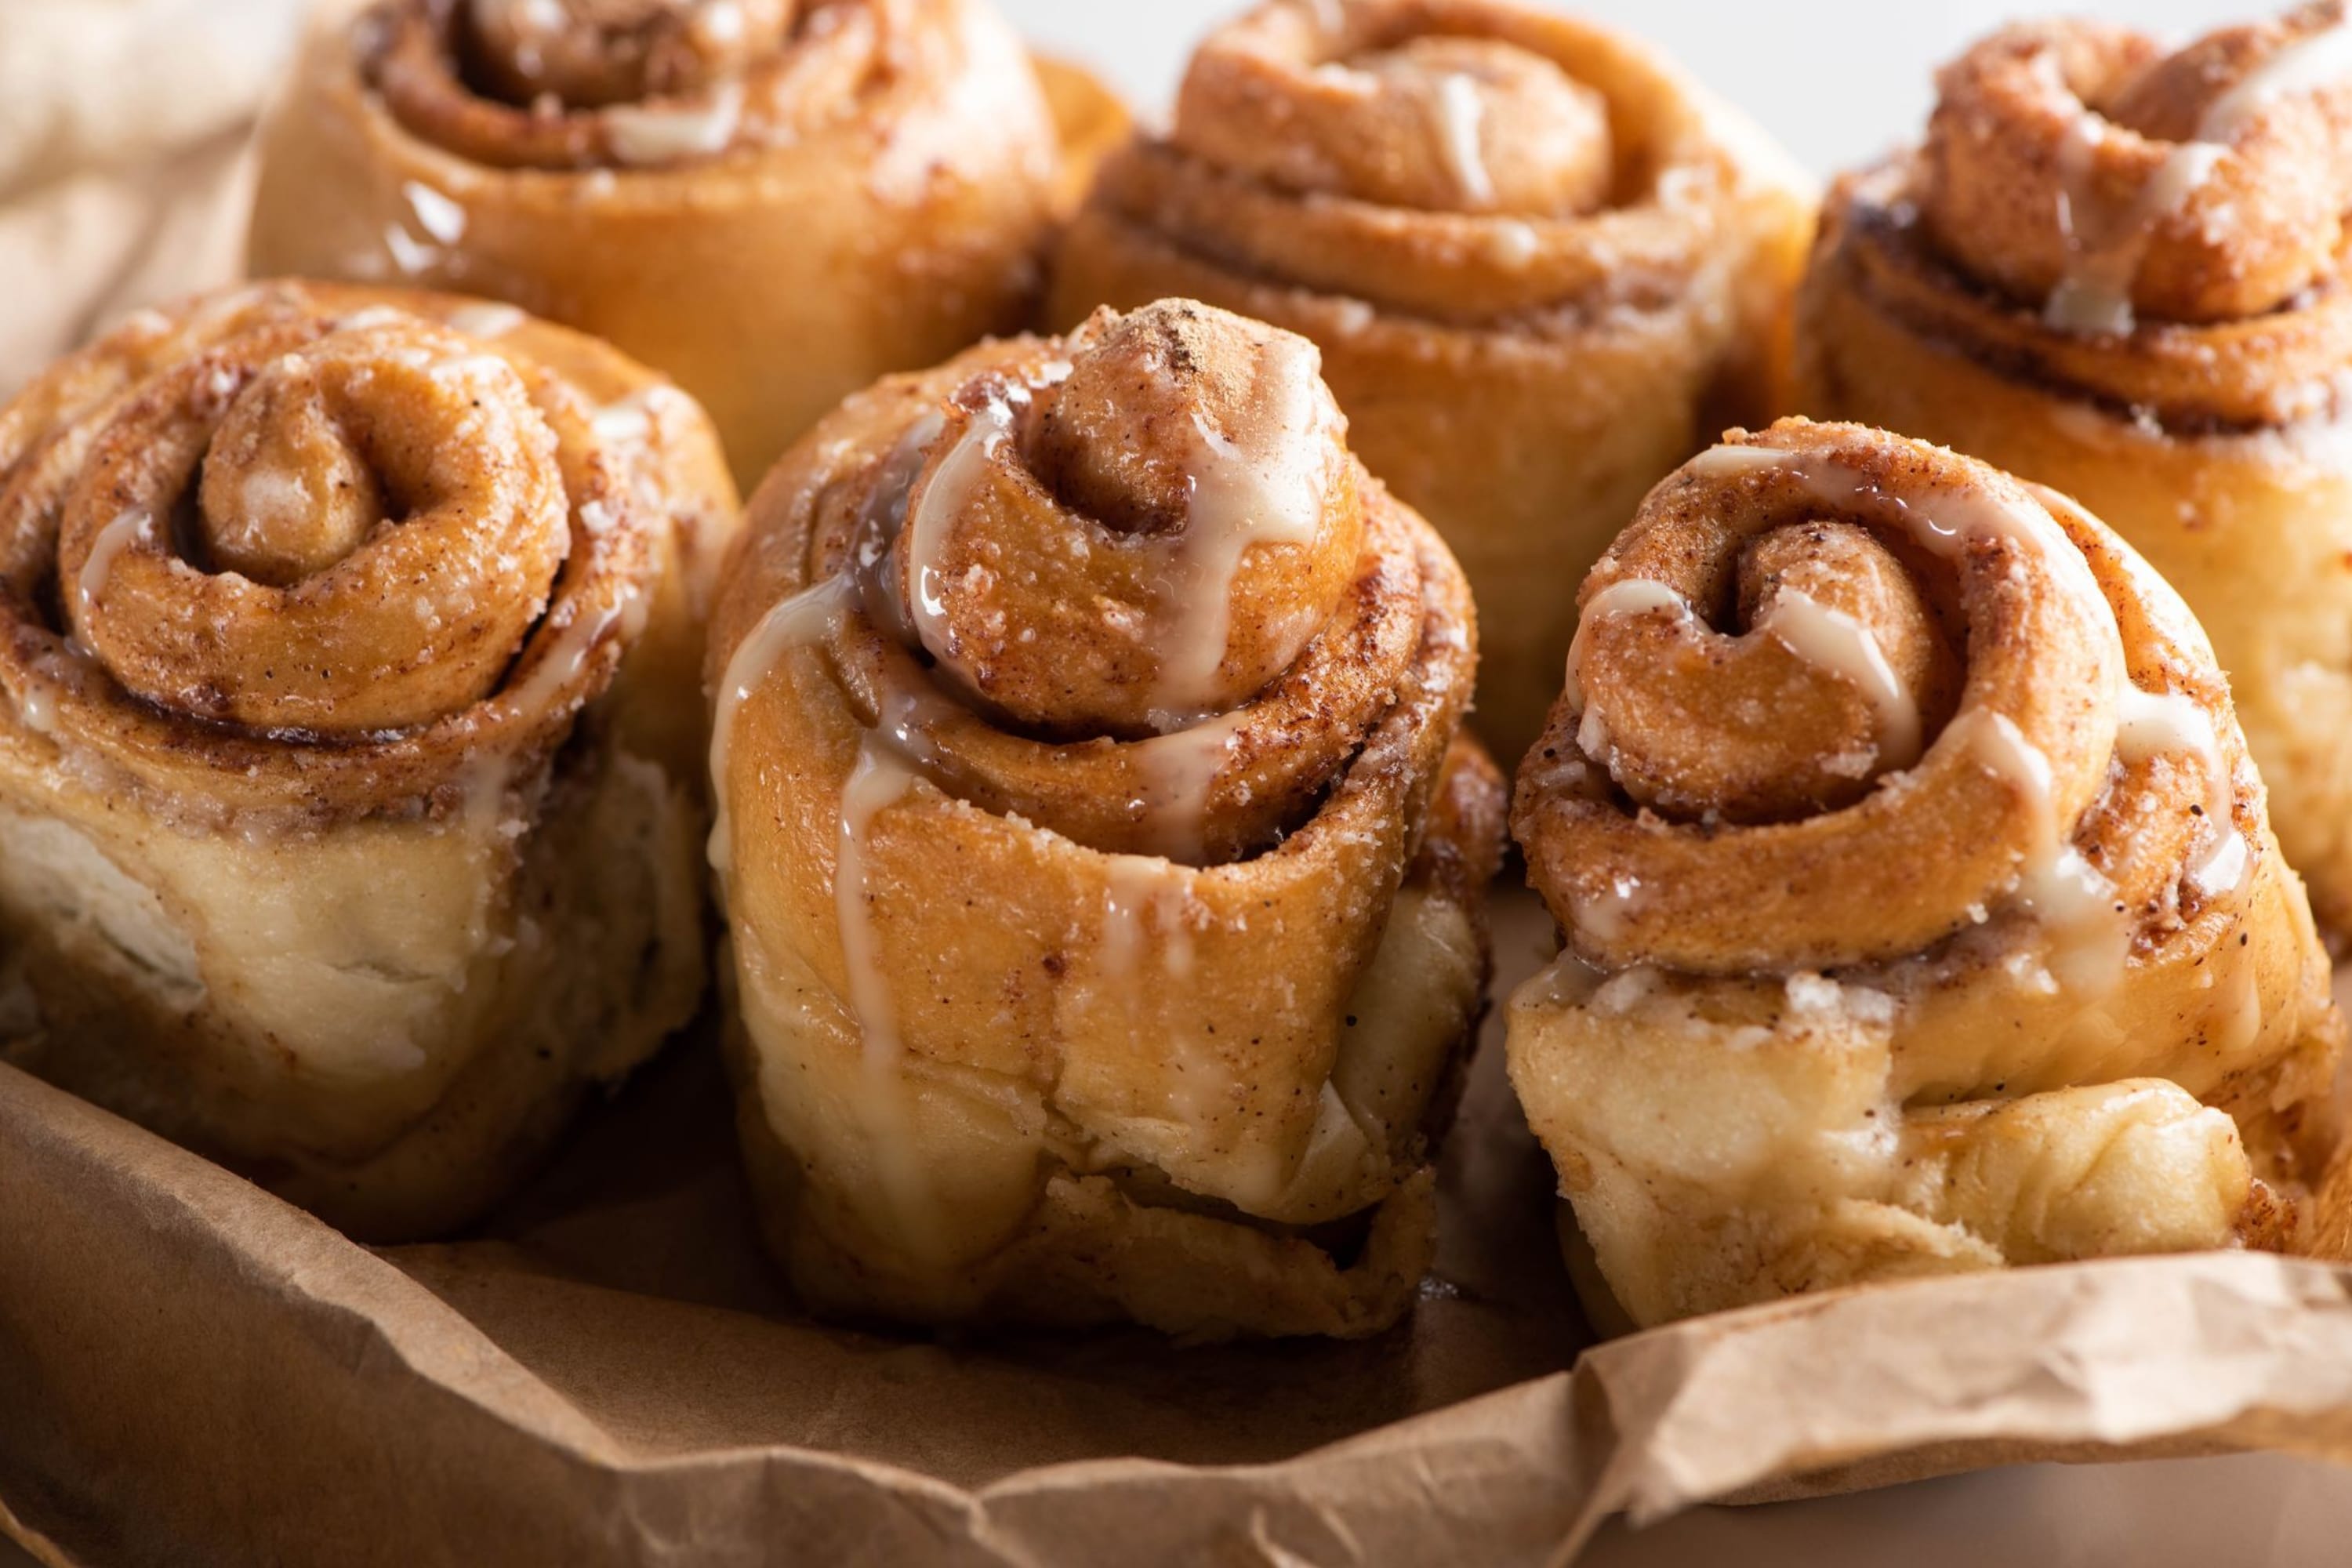 How to Reheat Cinnamon Rolls Without Drying Them Out